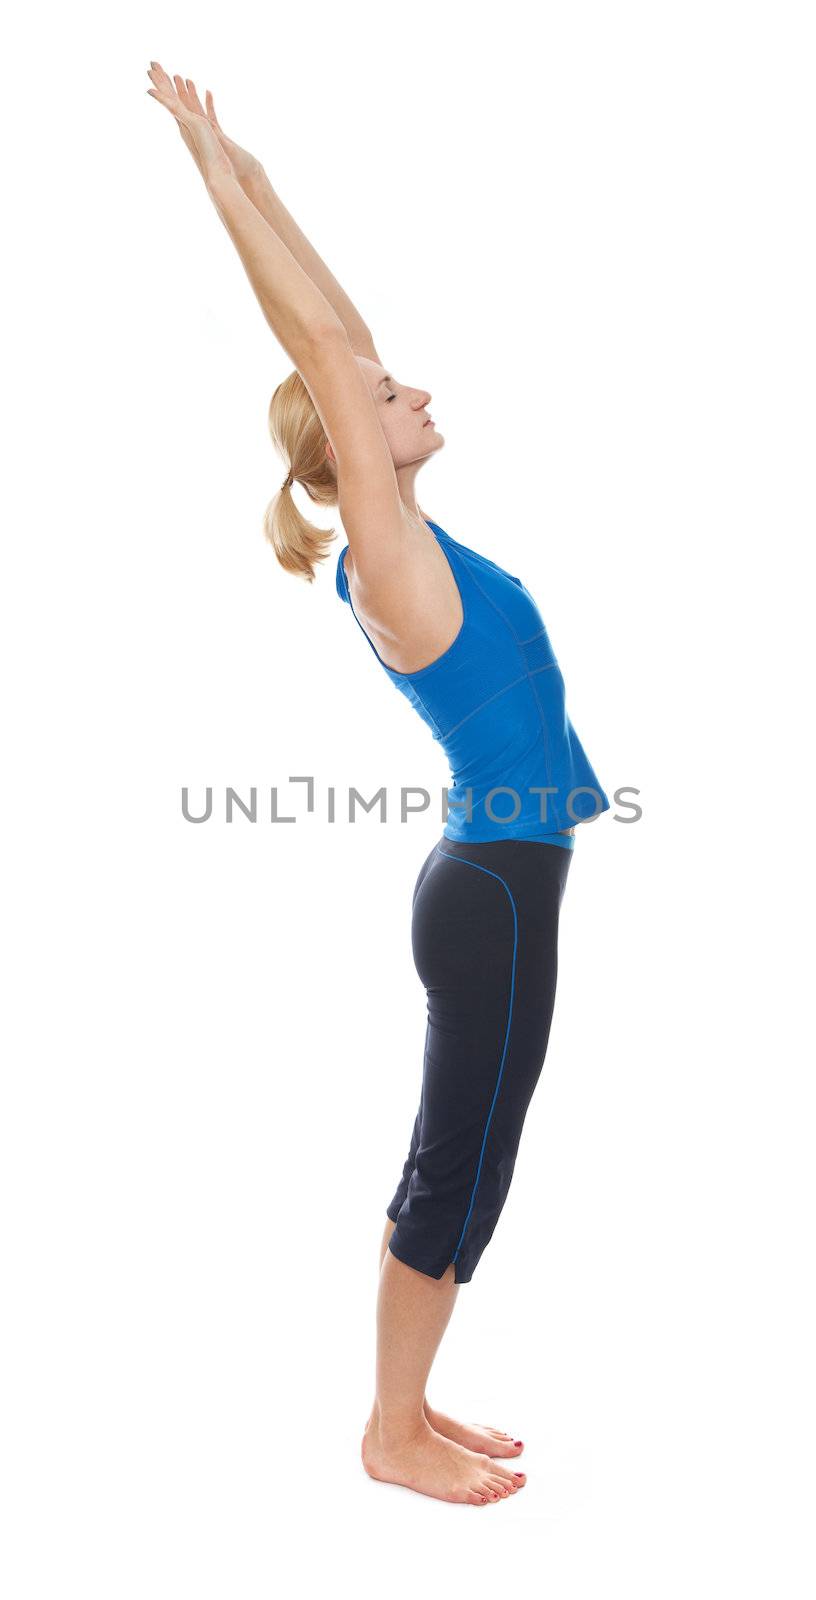 Practicing Yoga. Young woman isolated on white background